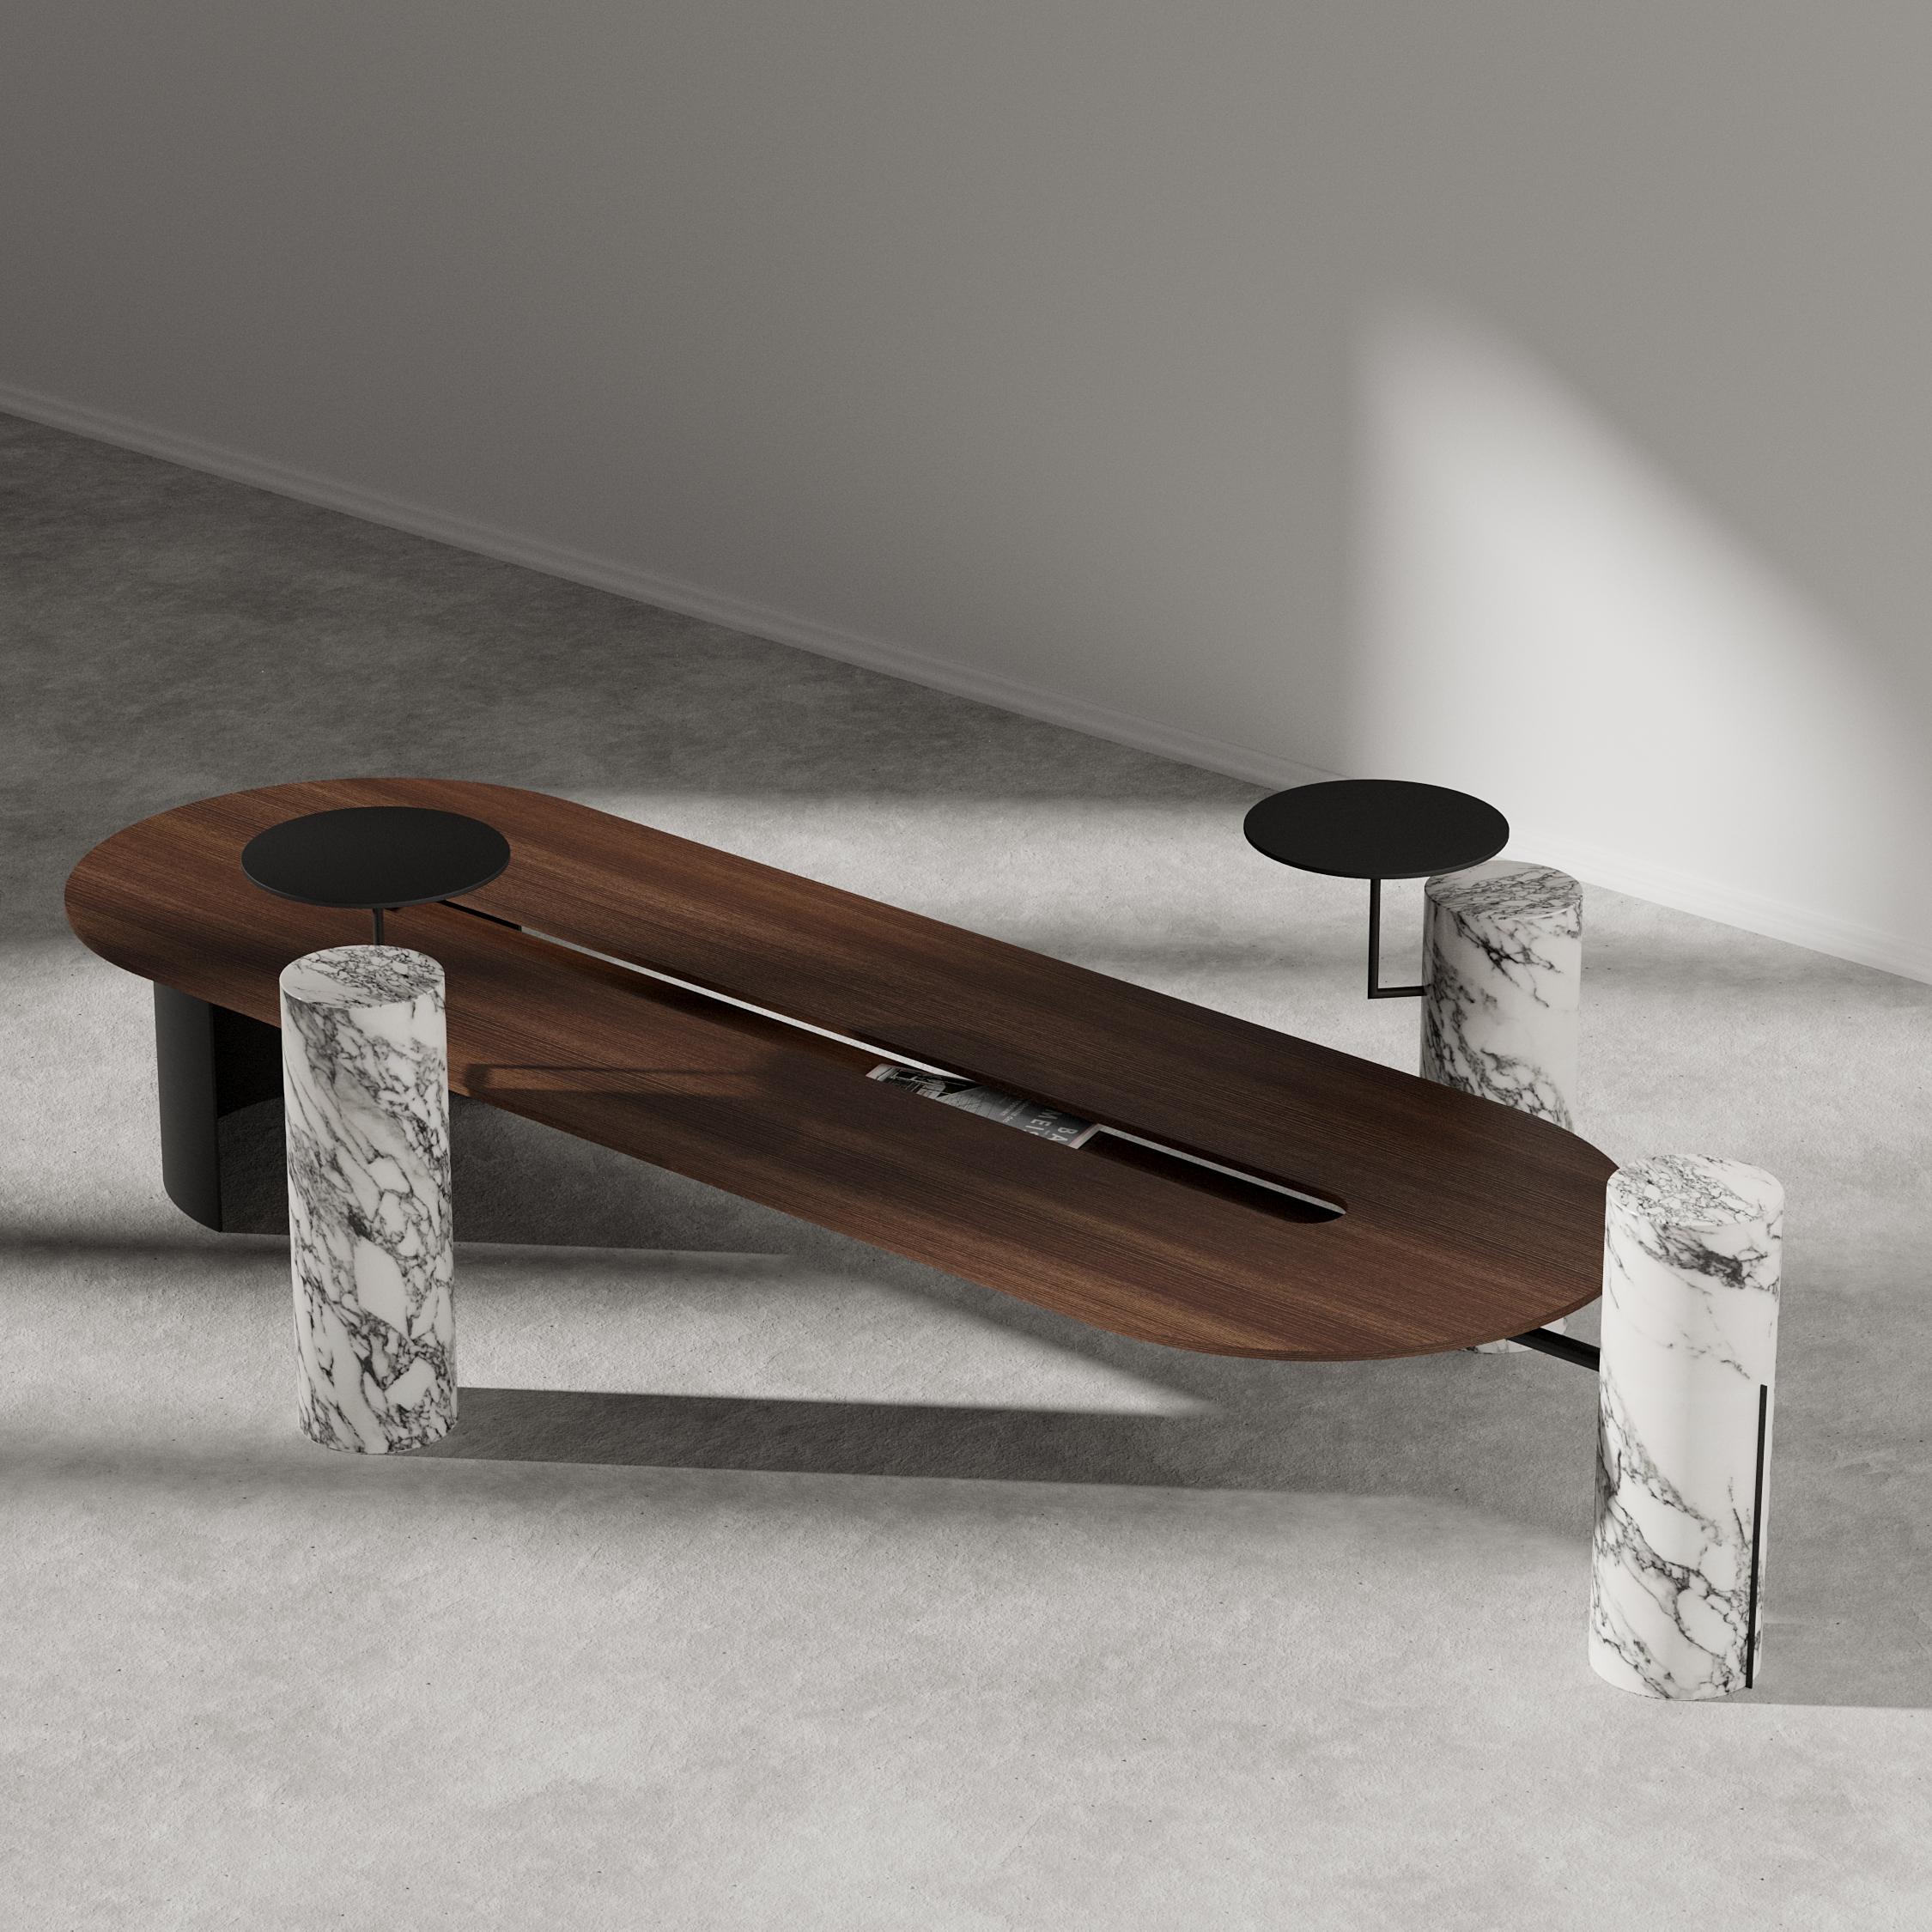 Folliland walnut center table by Borgi Bastormagi
Dimensions: W 195 x D 60 x H 45 cm
Material: Walnut Veneer, Marble, Steel

Oval shape wood table with a lower wood level in the center. Structurally it is balanced with a metal curved
structure